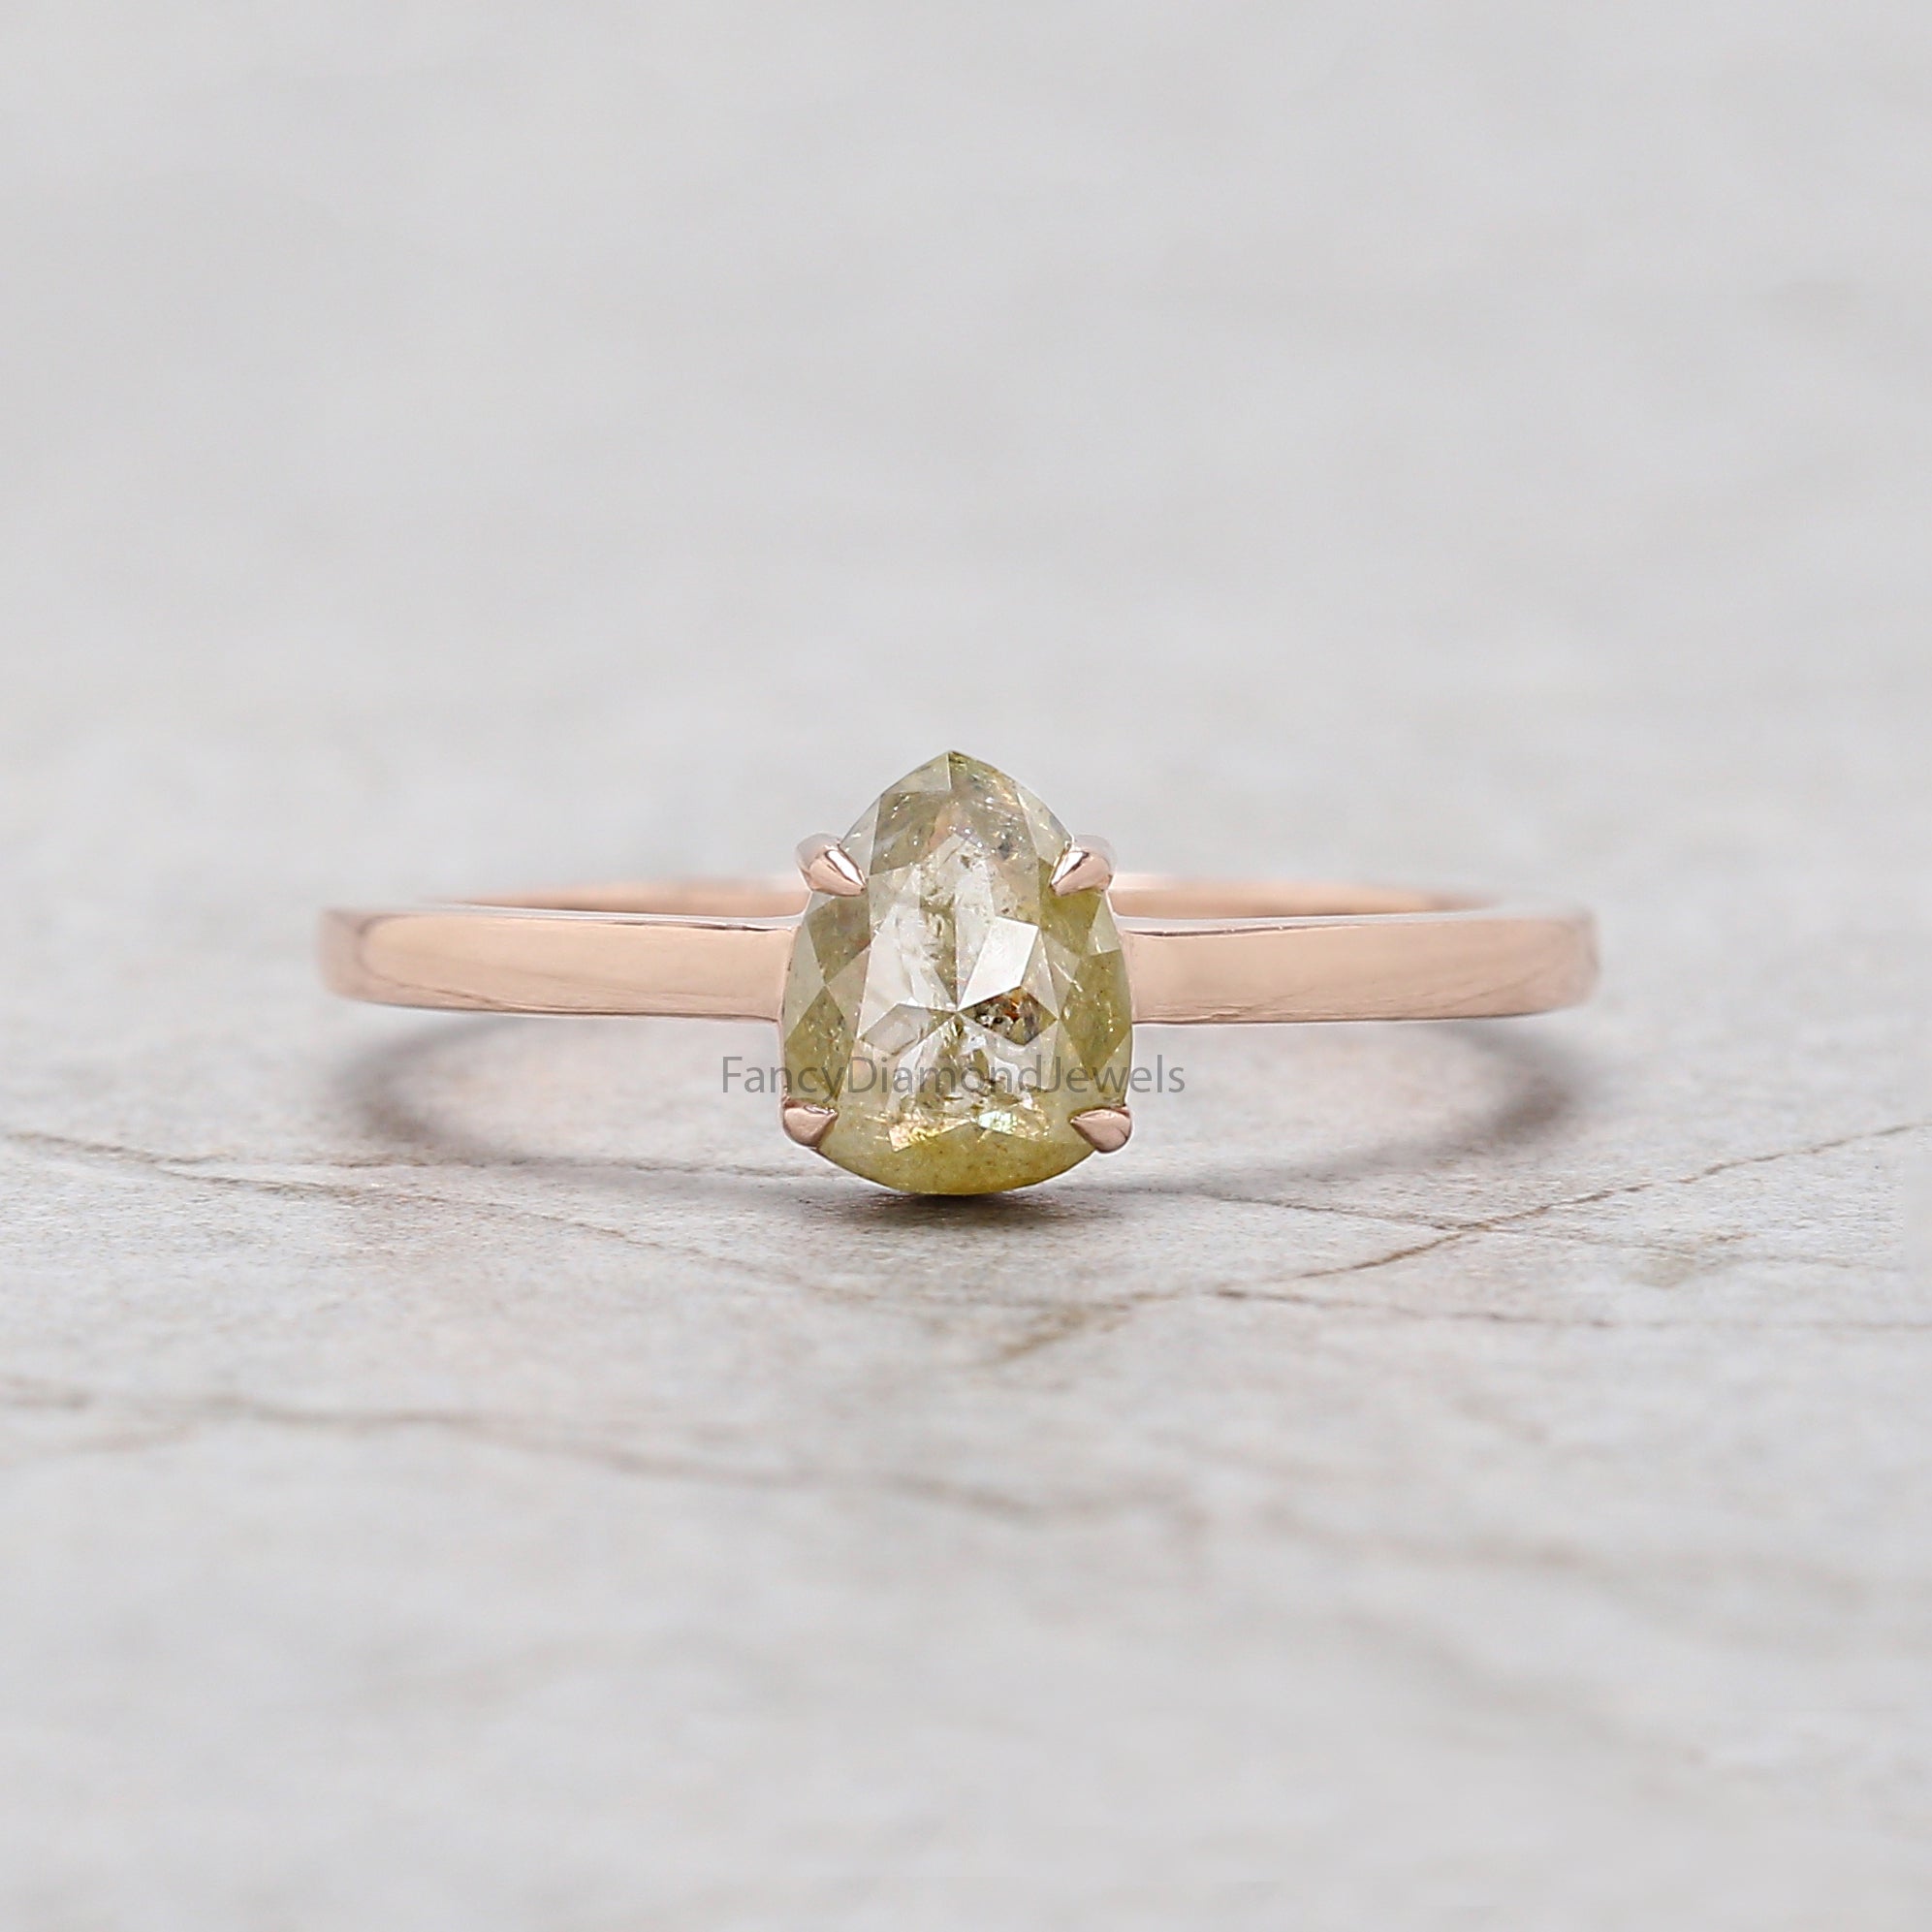 Pear Diamond Ring, Pear Engagement Ring, Yellow Color Pear Diamond Ring, Pear Shape Diamond Ring, Pear Cut Ring, Solitaire Ring, KD1126